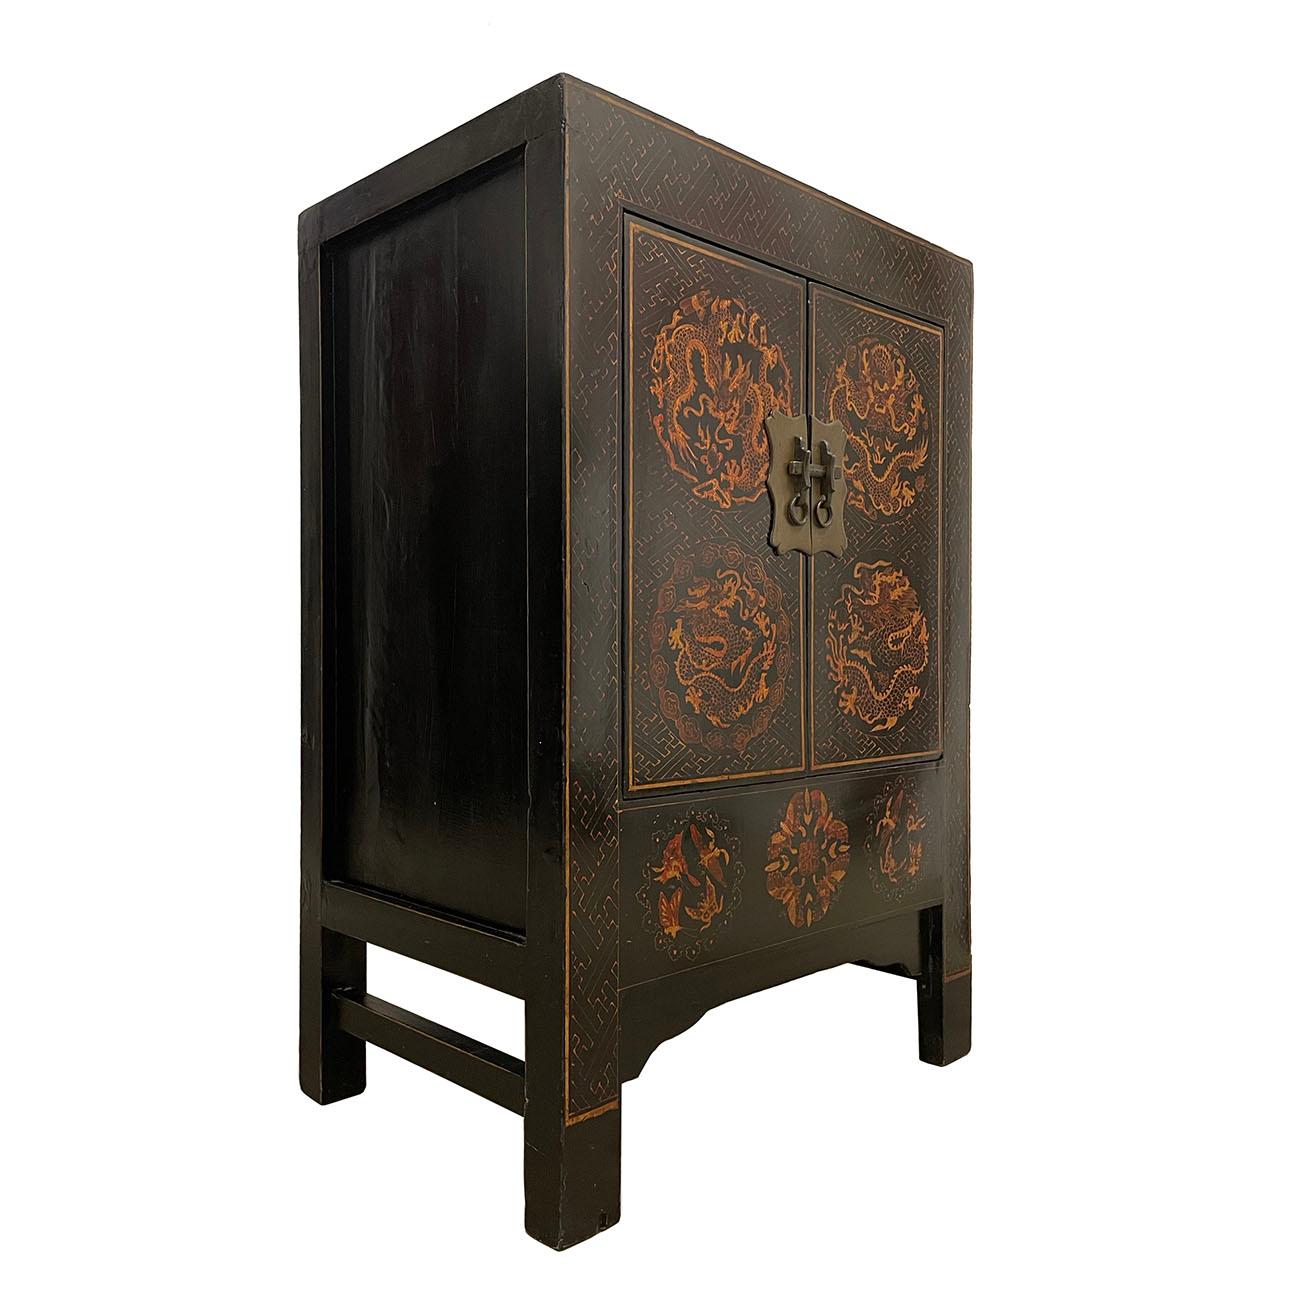 This beautiful Night Stand is hand made and have beautiful Chinese traditional folks art painting of dragon on the front. Very sturdy. It has two open doors compartment on the front with antique hardware on it. There is one shelf inside compartment